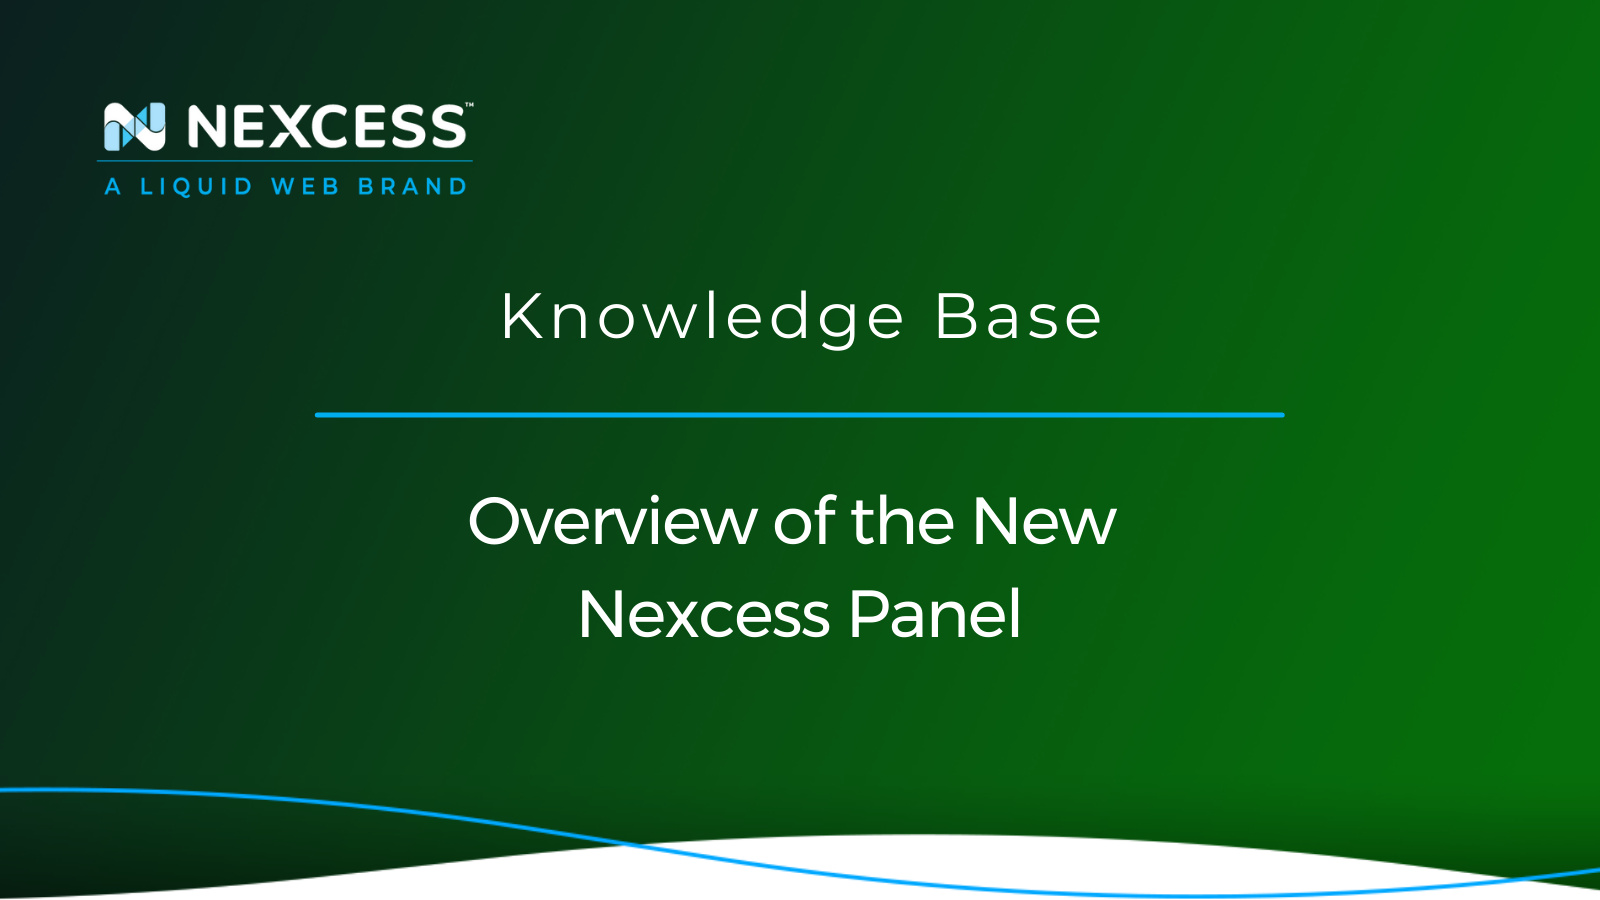 Overview of the New Nexcess Panel